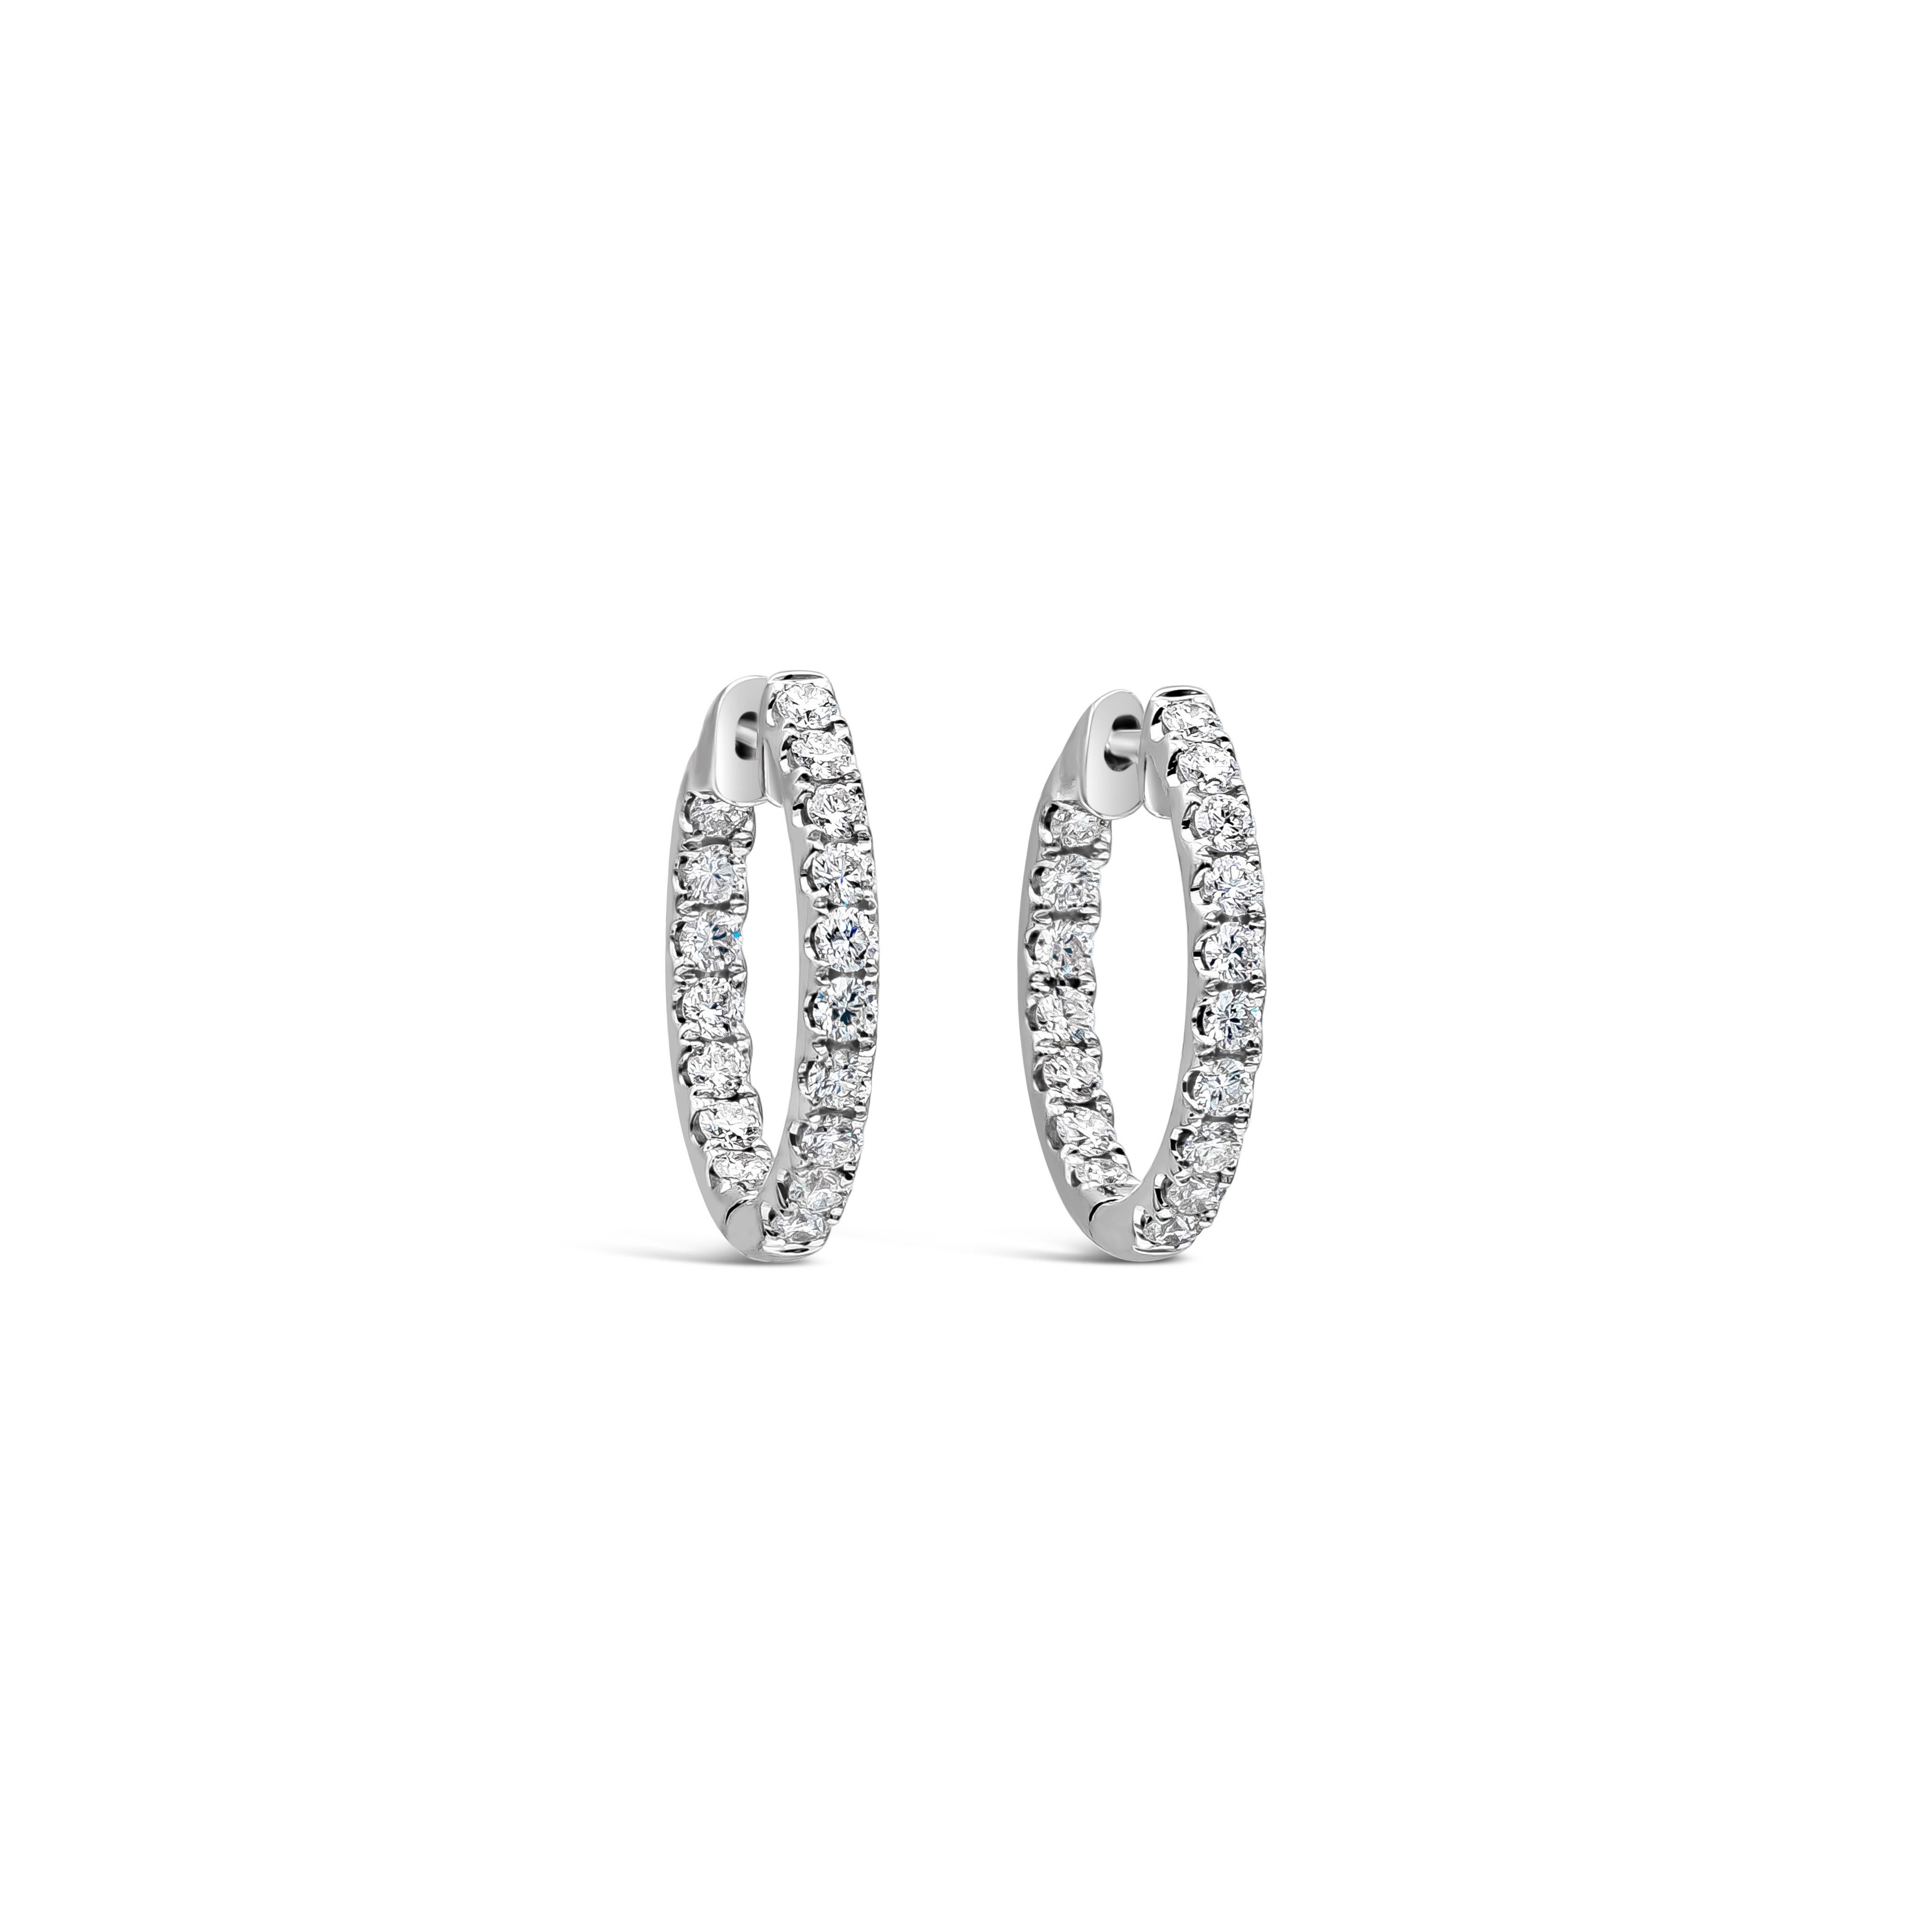 A classic and versatile style hoop earrings showcasing round brilliant diamonds weighing 1.32 carat total, F Color and VS-SI in Clarity. Set in a scalloped pave style, Made with 18K White Gold.

Roman Malakov is a custom house, specializing in